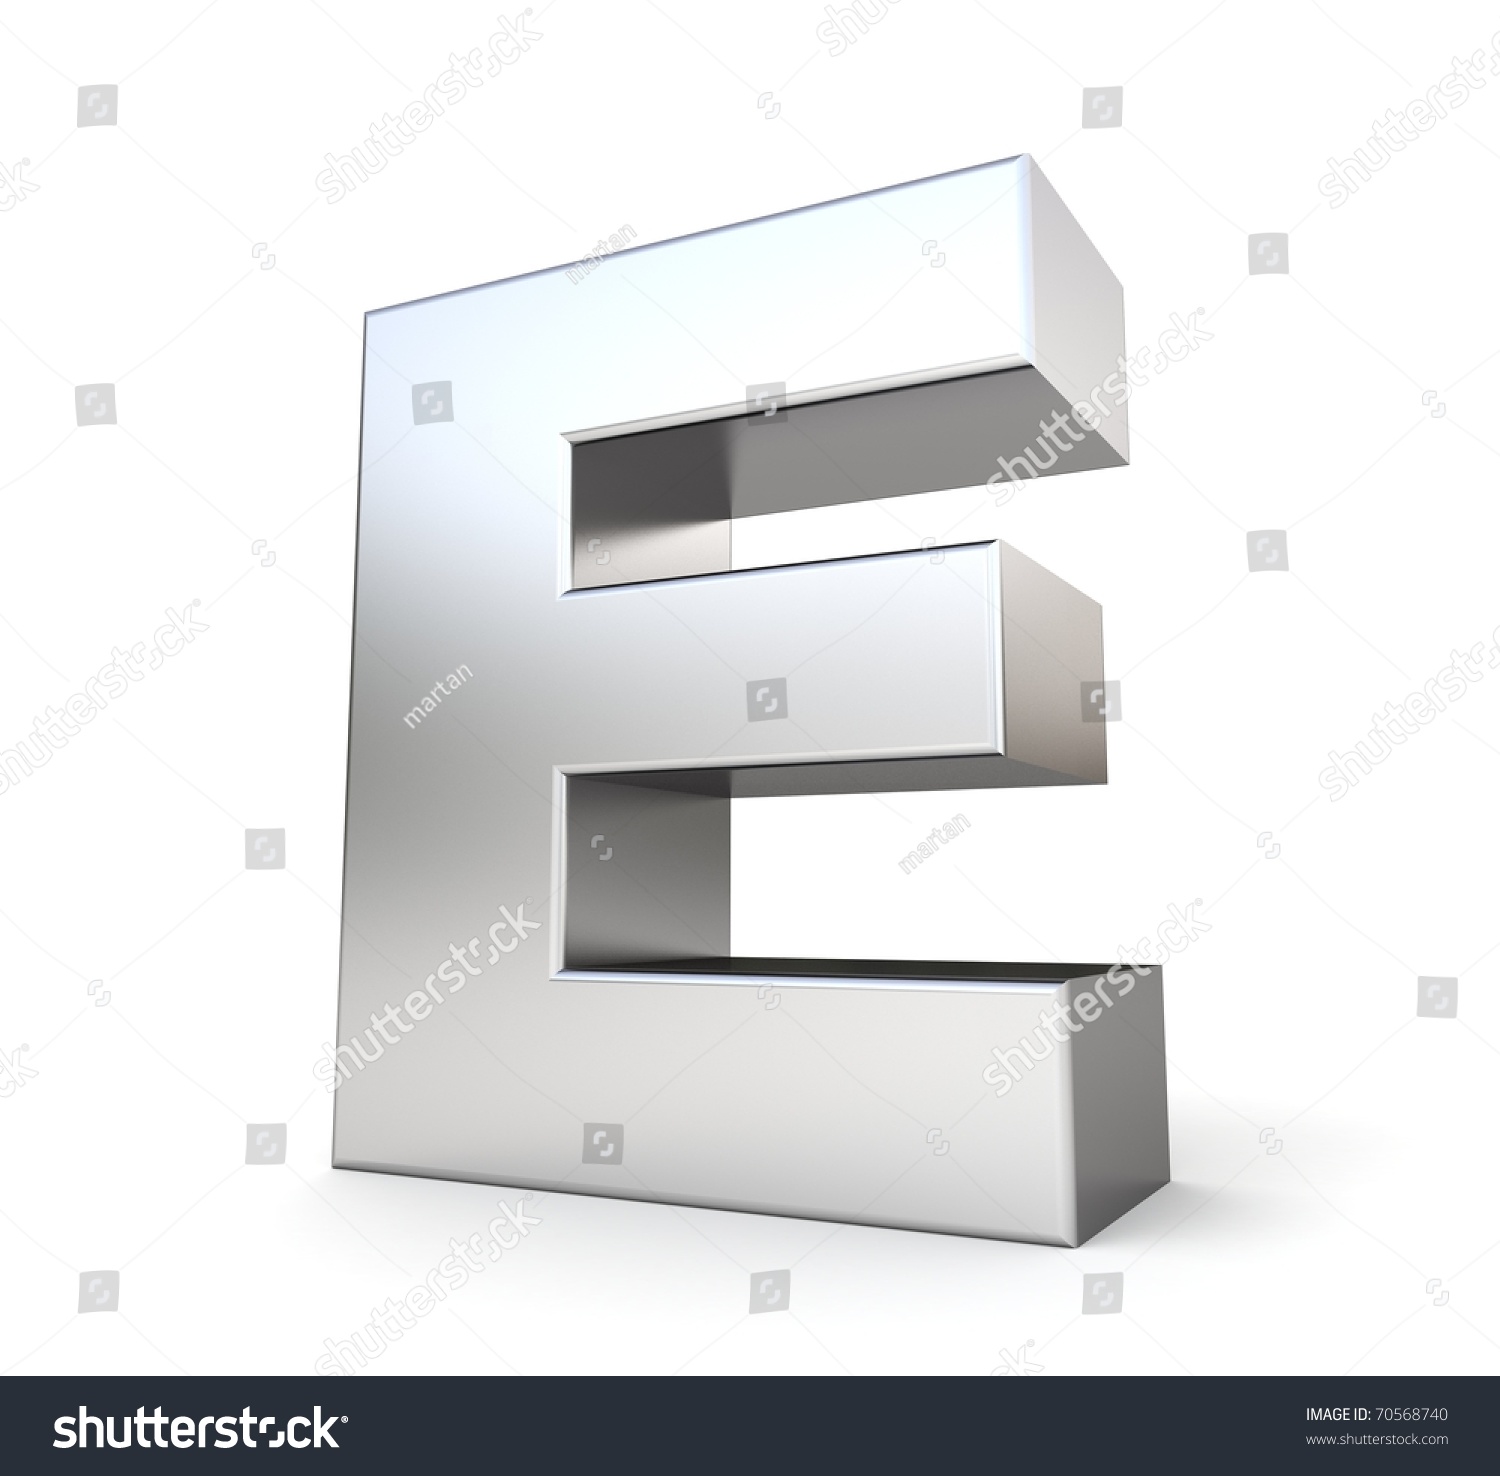 3d Letter E From My Metal Letter Collection Stock Photo 70568740 ...